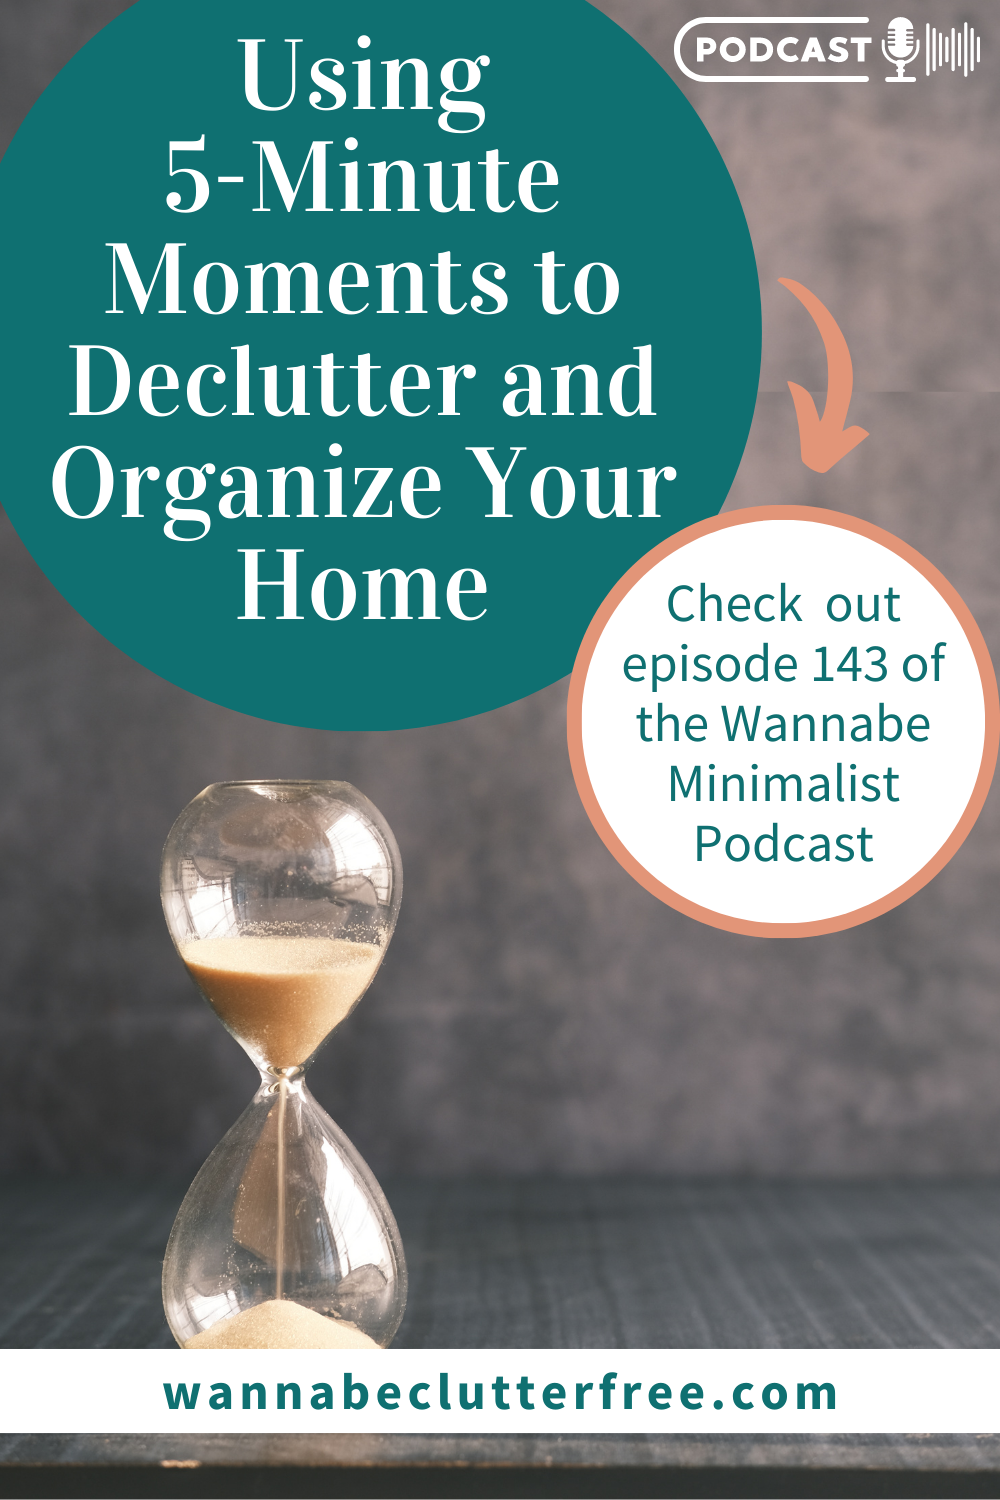 Using 5-Minute Moments to Declutter and Organize Your Home